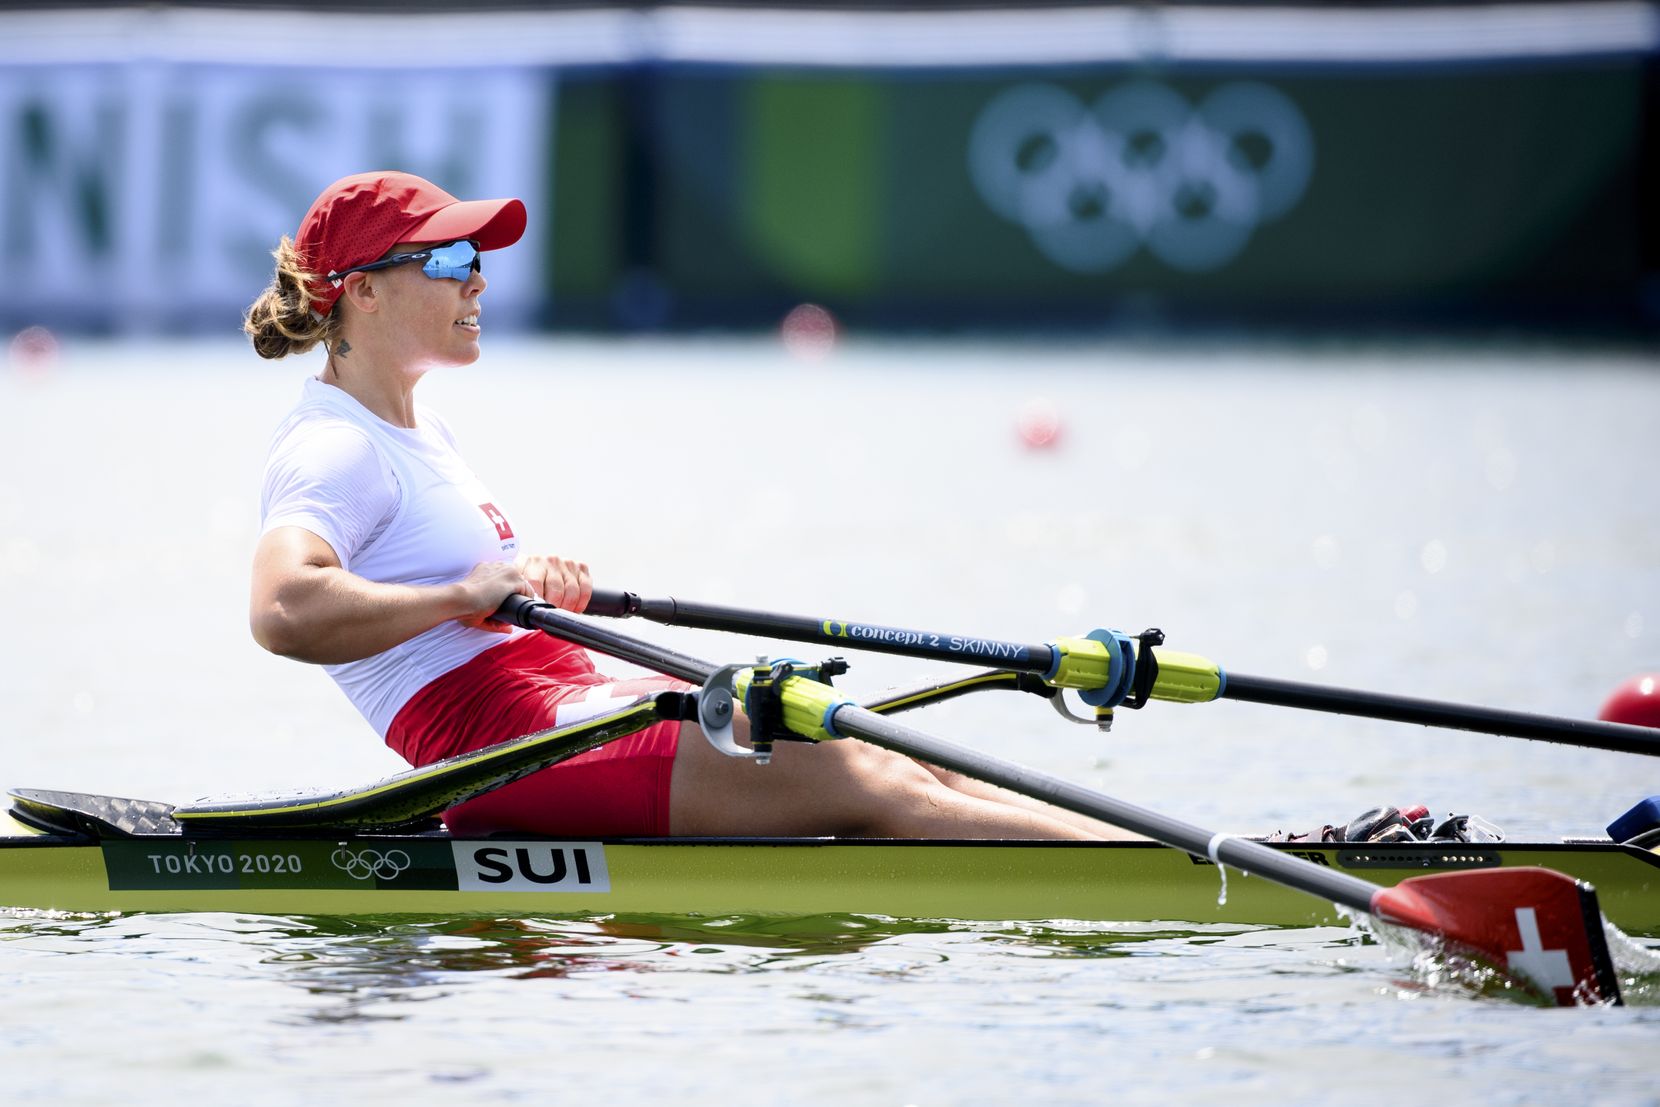 Swiss rower Jeannine Gmelin competes in the women's rowing single sculls heat at the 2020 Tokyo Summer Olympics in Tokyo, Japan, on Friday, July 23, 2021. (KEYSTONE/Laurent Gillieron)